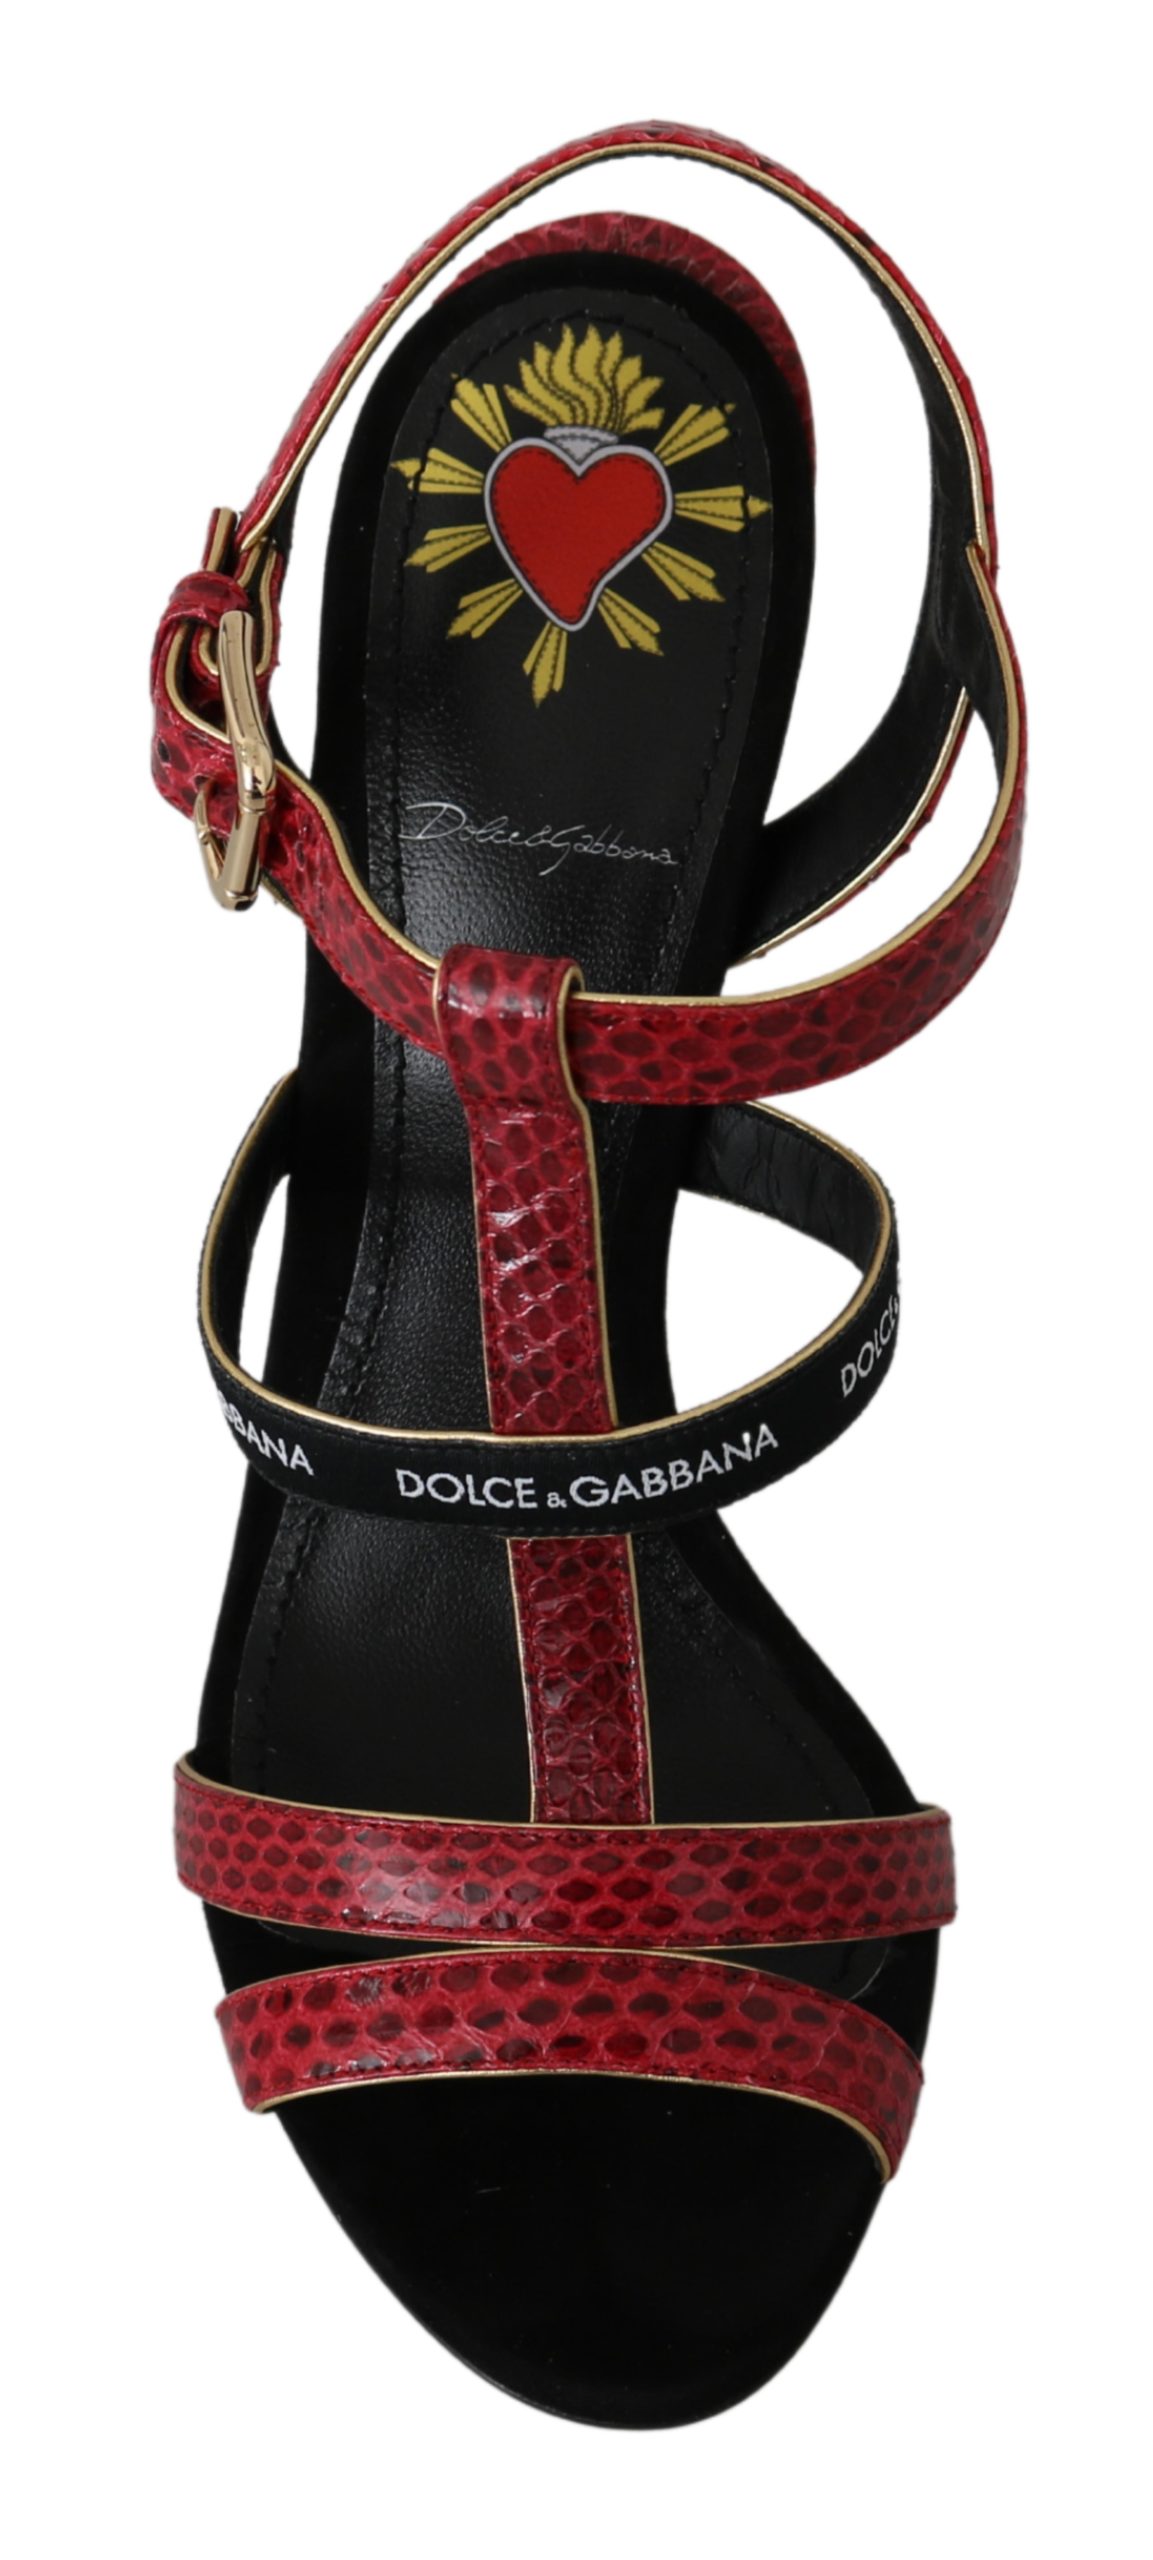 Dolce & Gabbana Women's Ayers Leather Sandals Red - EU35/US4.5